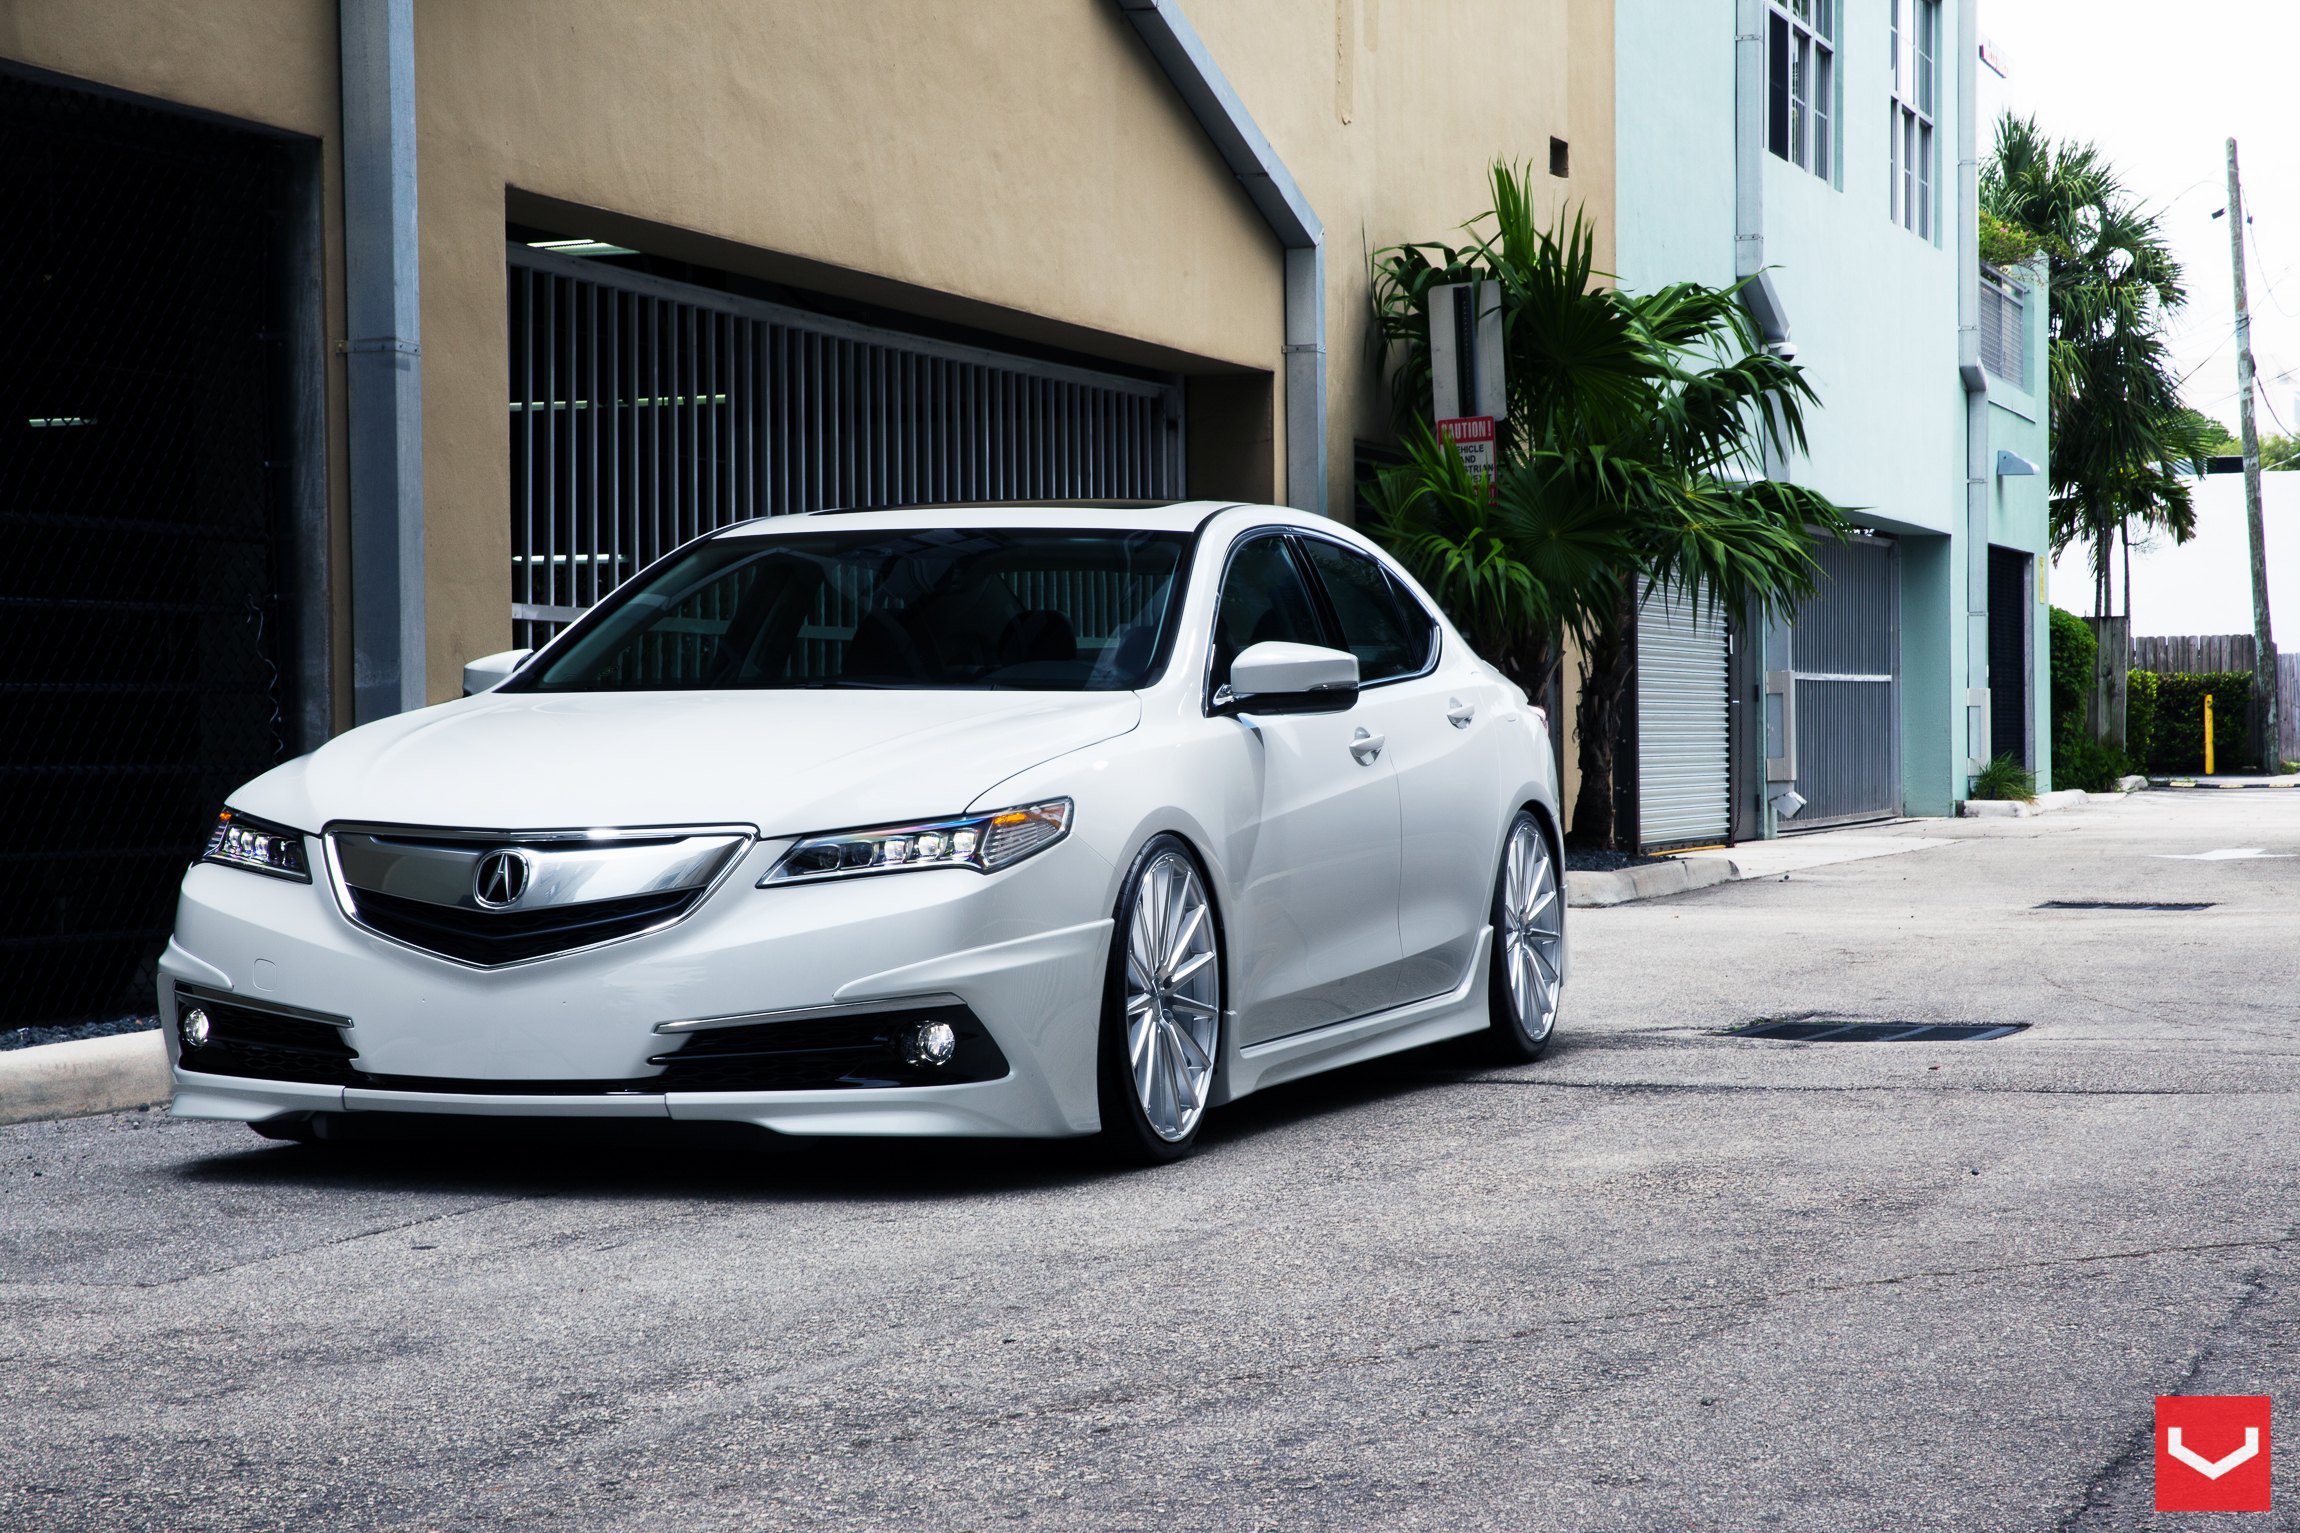 Aftermarket Headlights on Acura TLX - Photo by Vossen